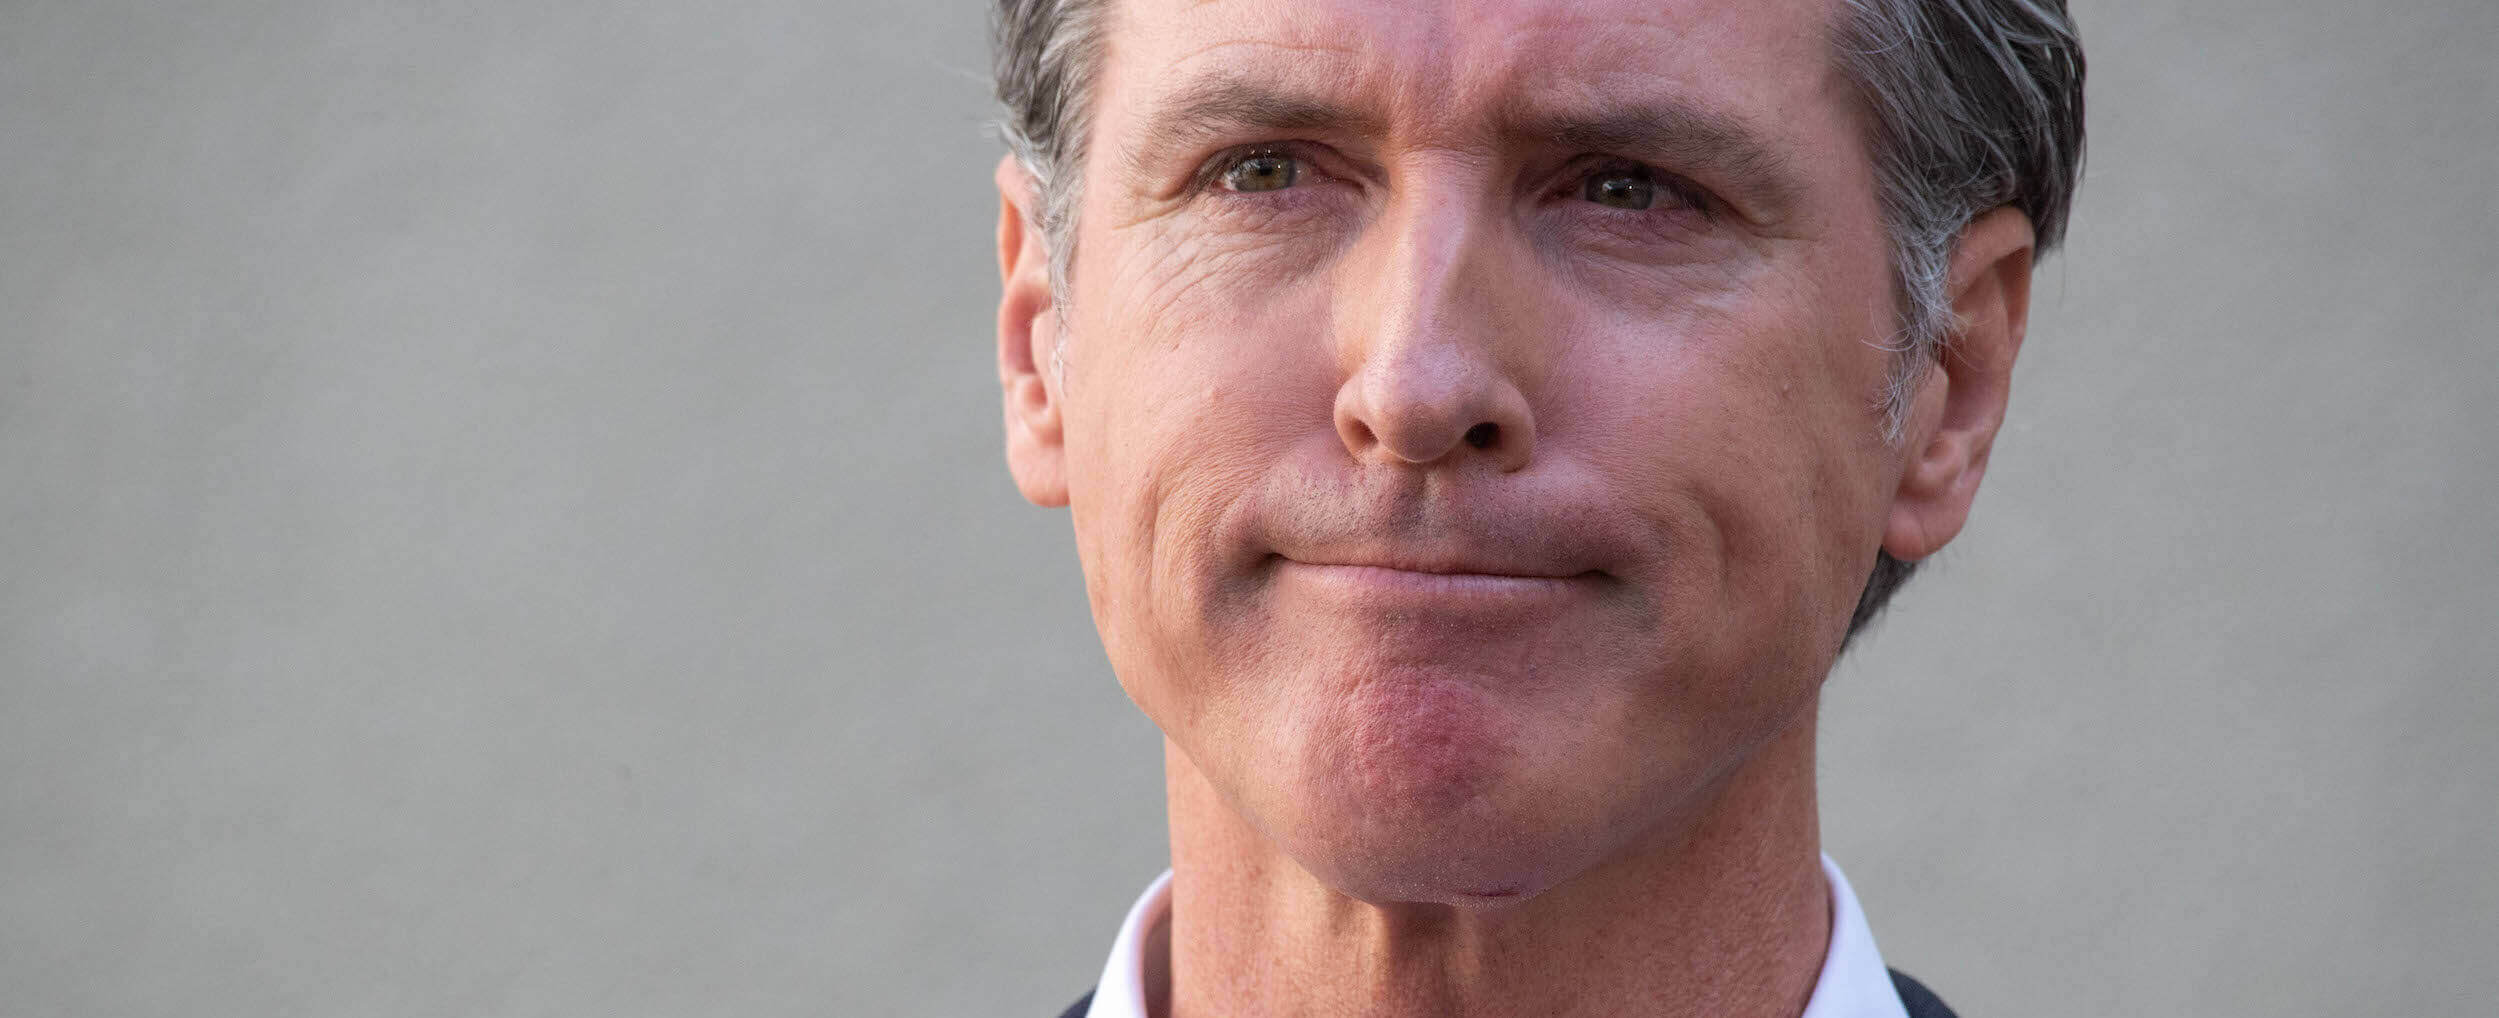 Gavin Newsom Claims Nationwide 'Systematic Attack' on LGBTQ People will Begin Soon